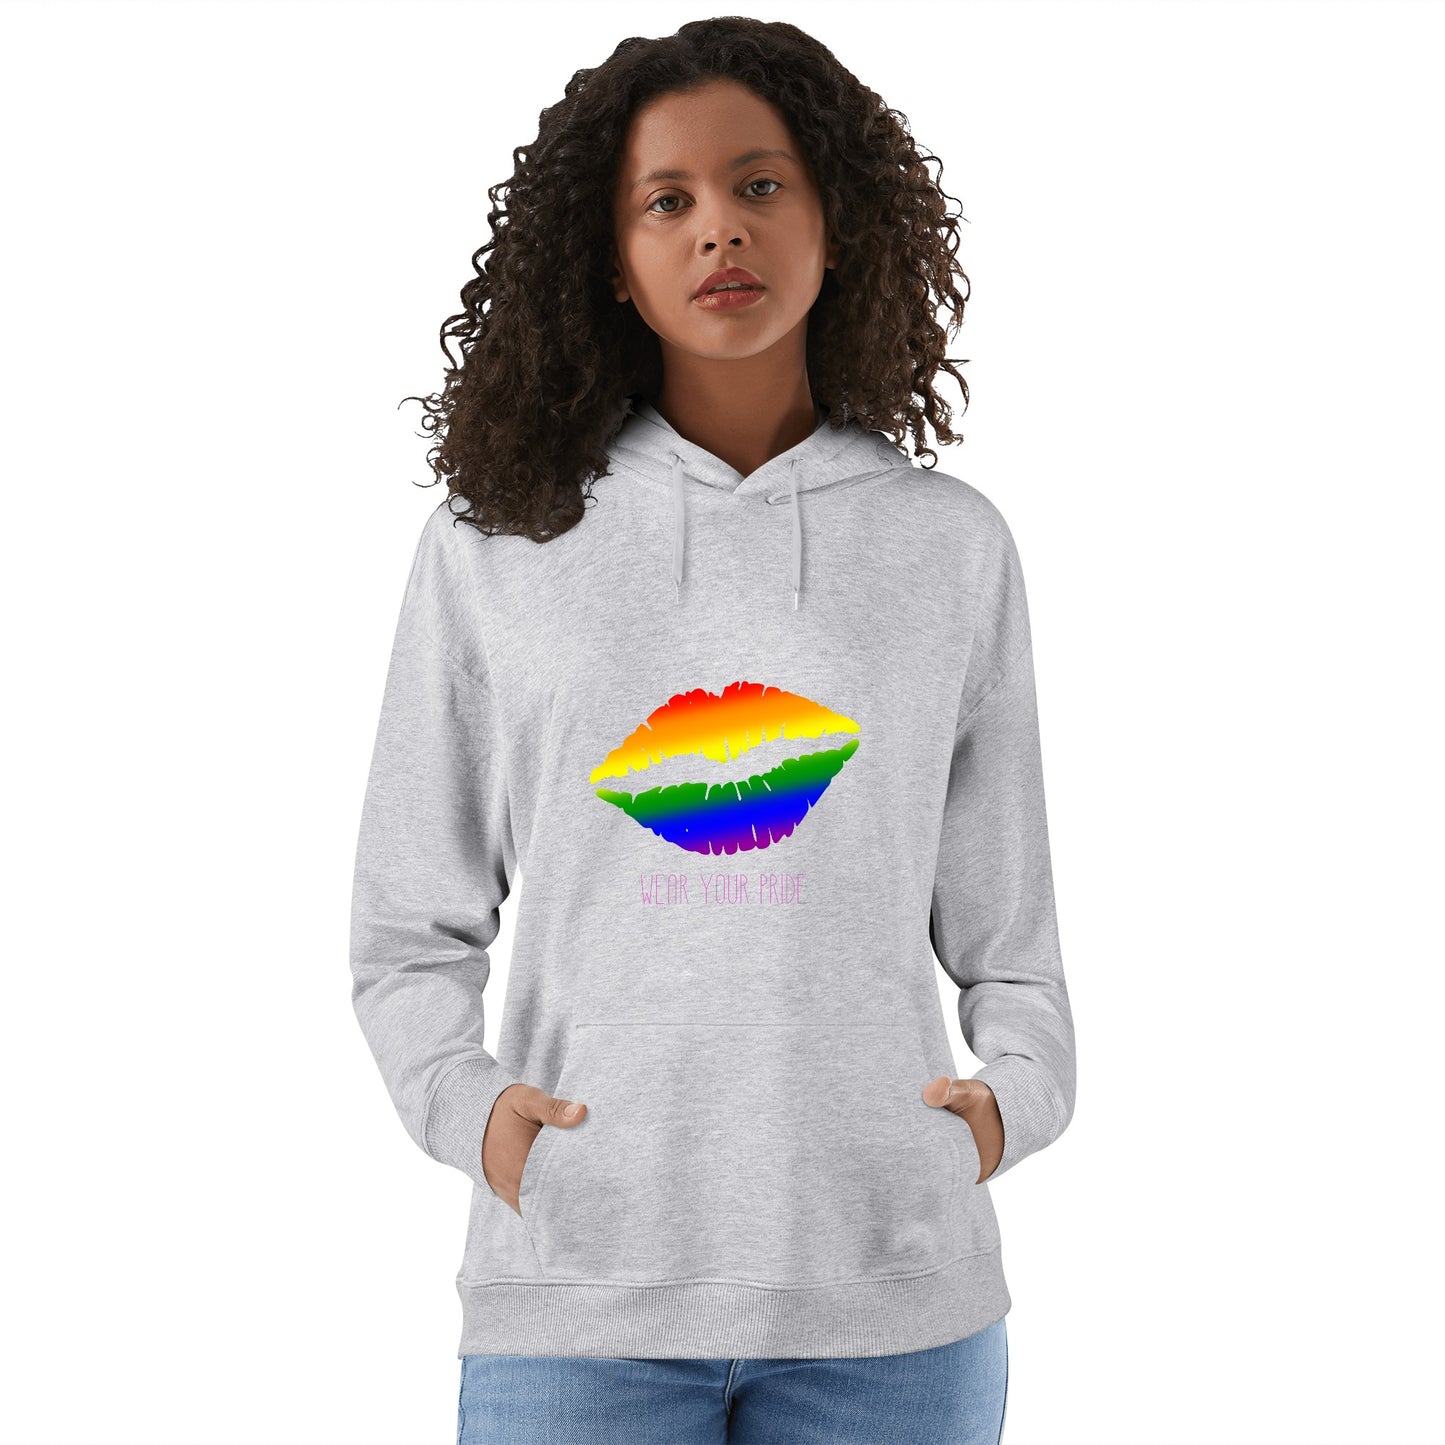 Wear Your Pride LGBTQ+ Adult Cotton Hoodie